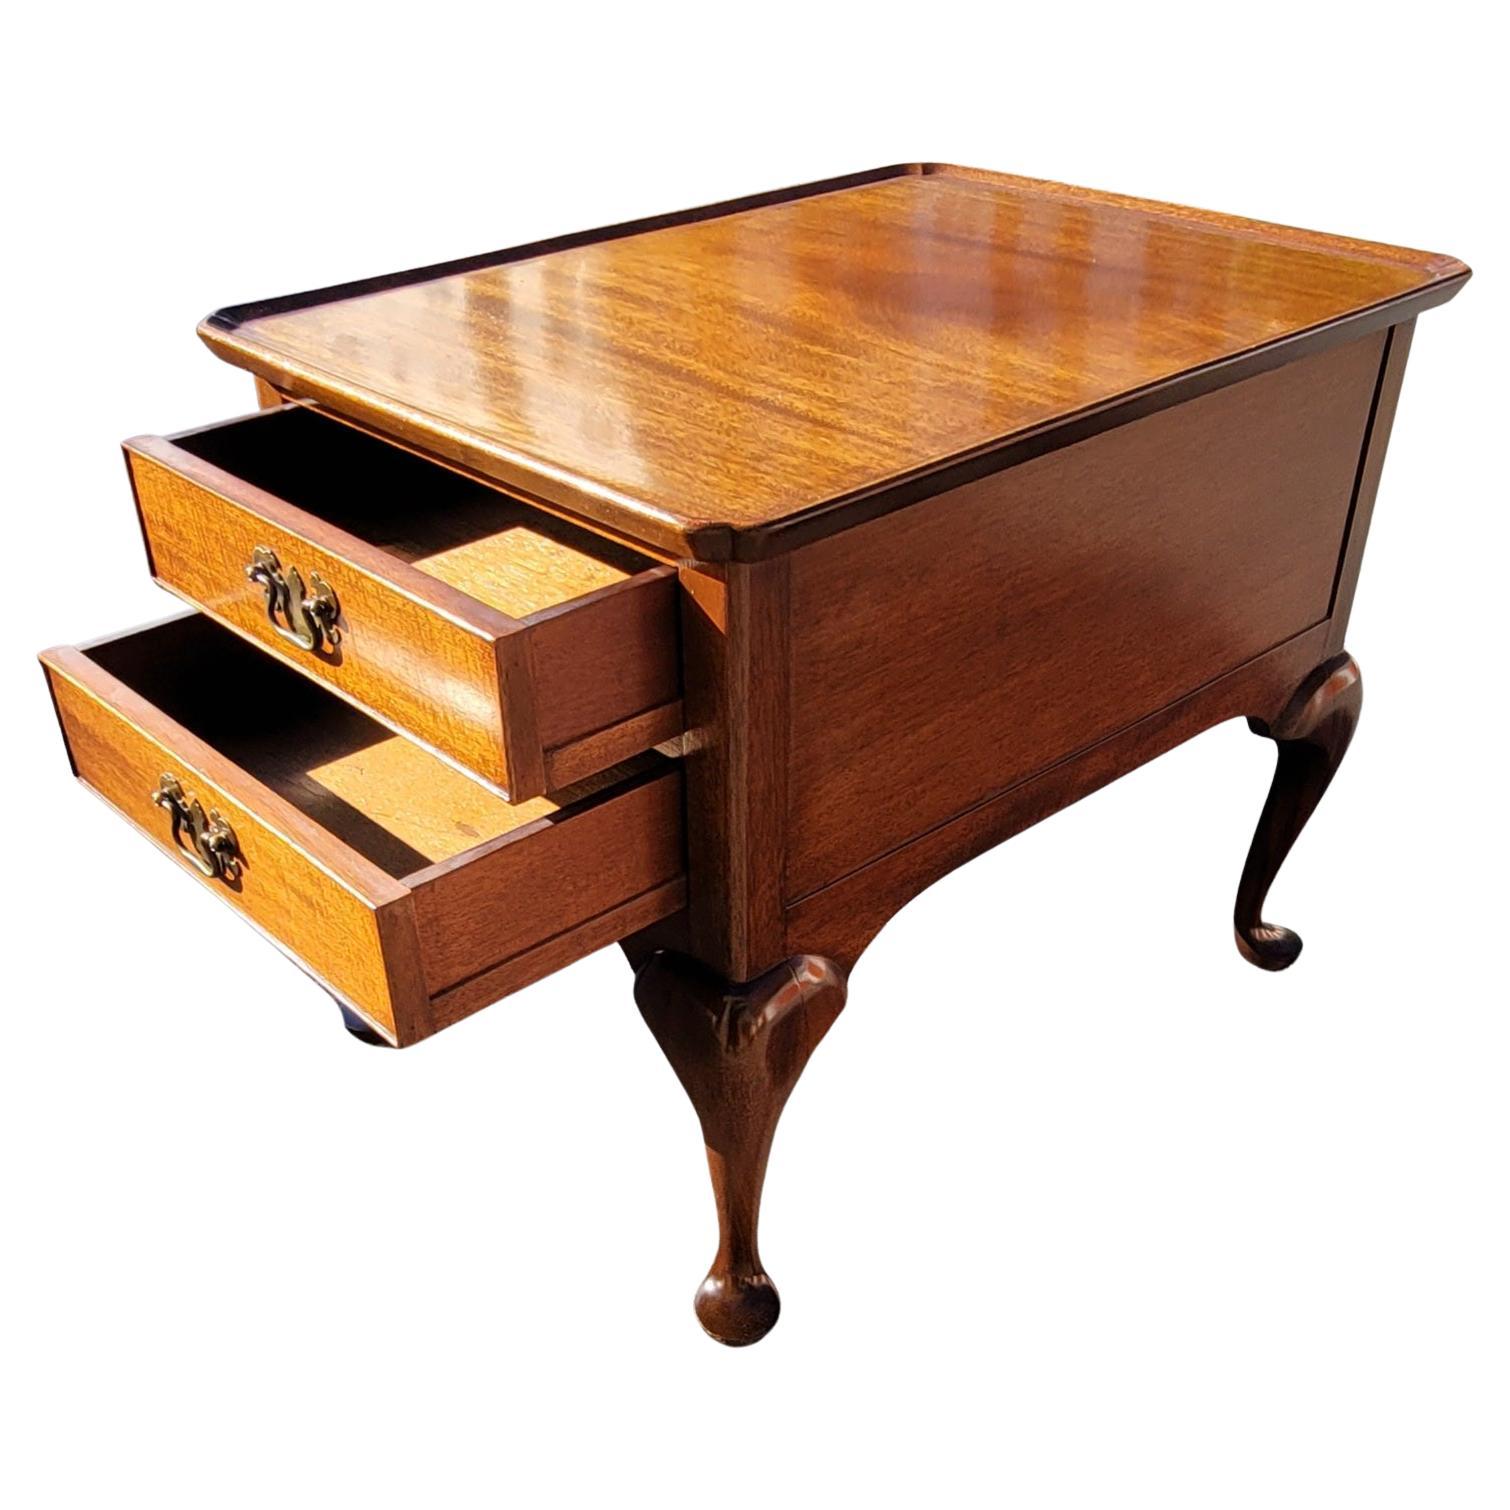 Biggs Furniture Two-Drawer Queen Anne Mahogany Side Table Nightstand In Good Condition For Sale In Germantown, MD